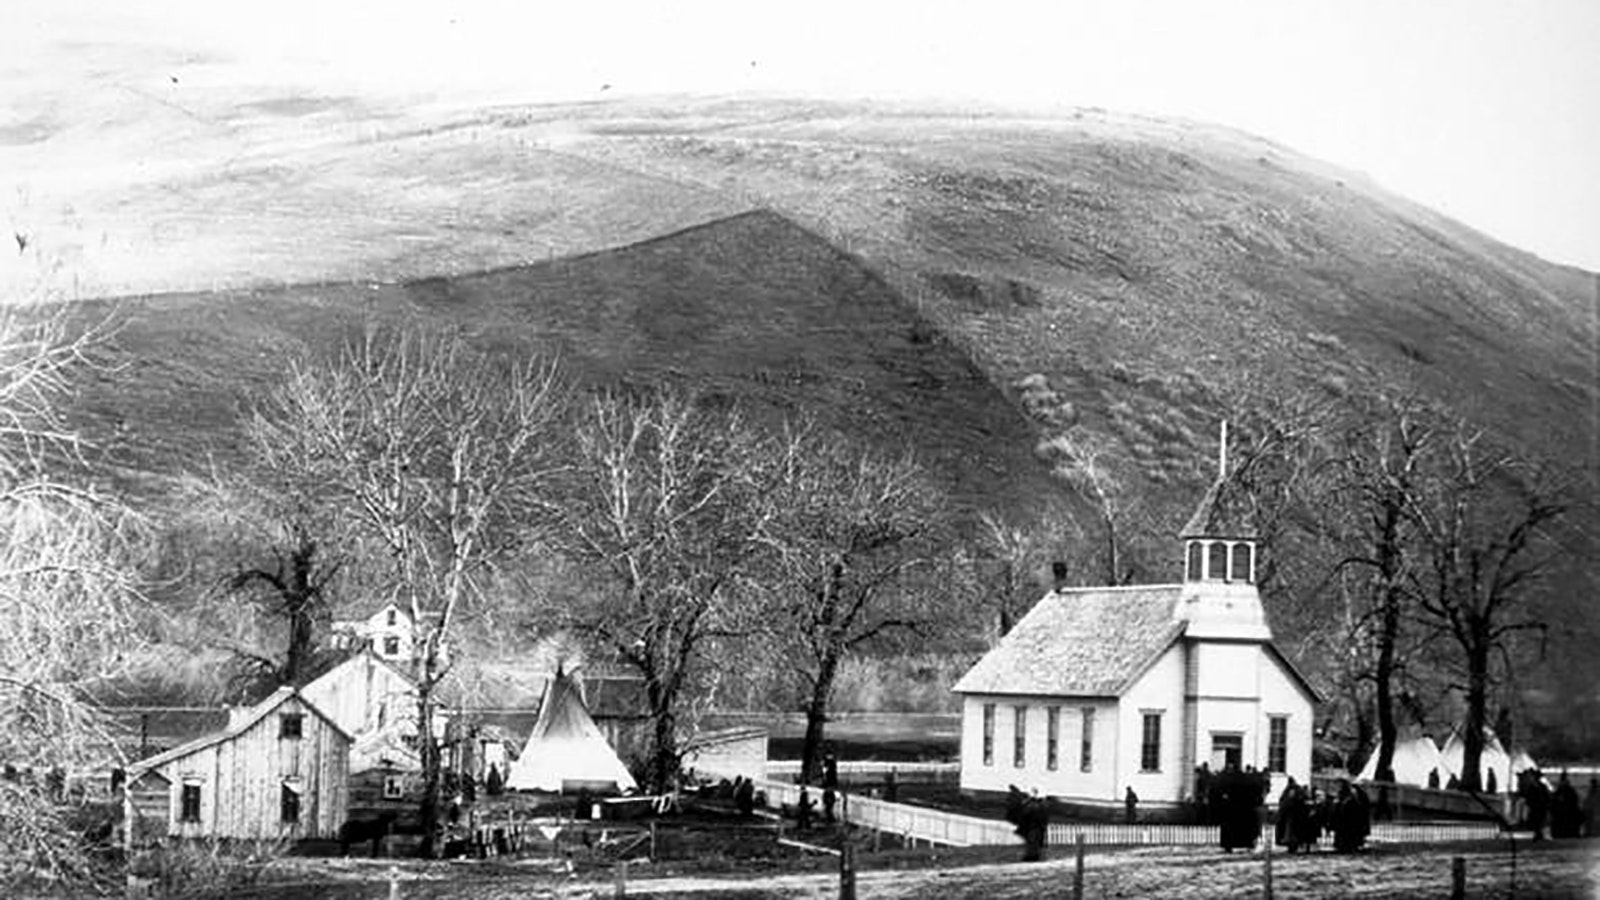 Henry and Eliza Spalding established a mission near what is now Lewiston, Idaho.